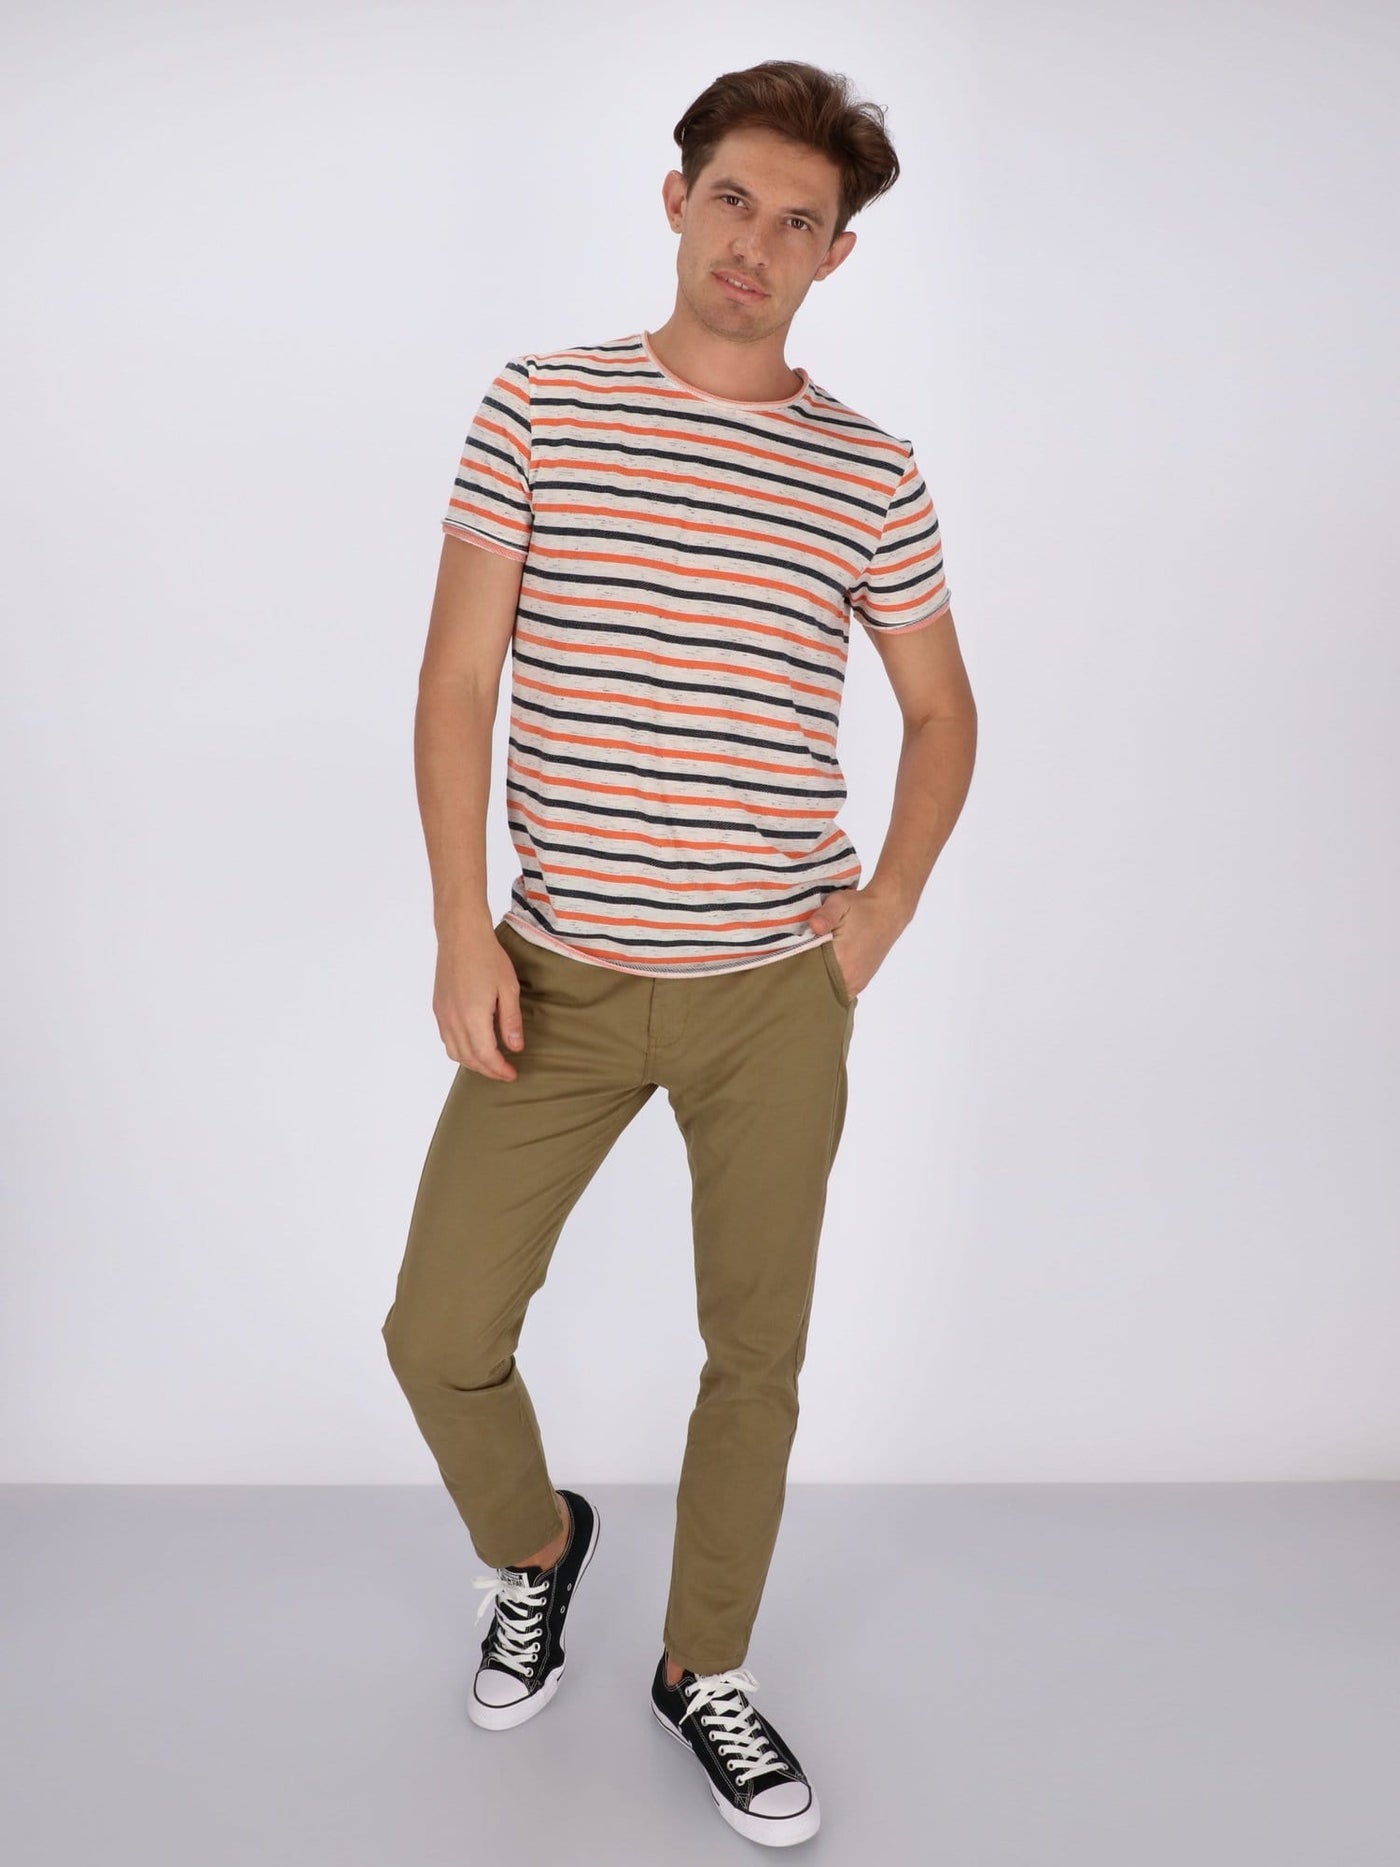 OR T-Shirts Contrasting Stripes Printed T-shirt